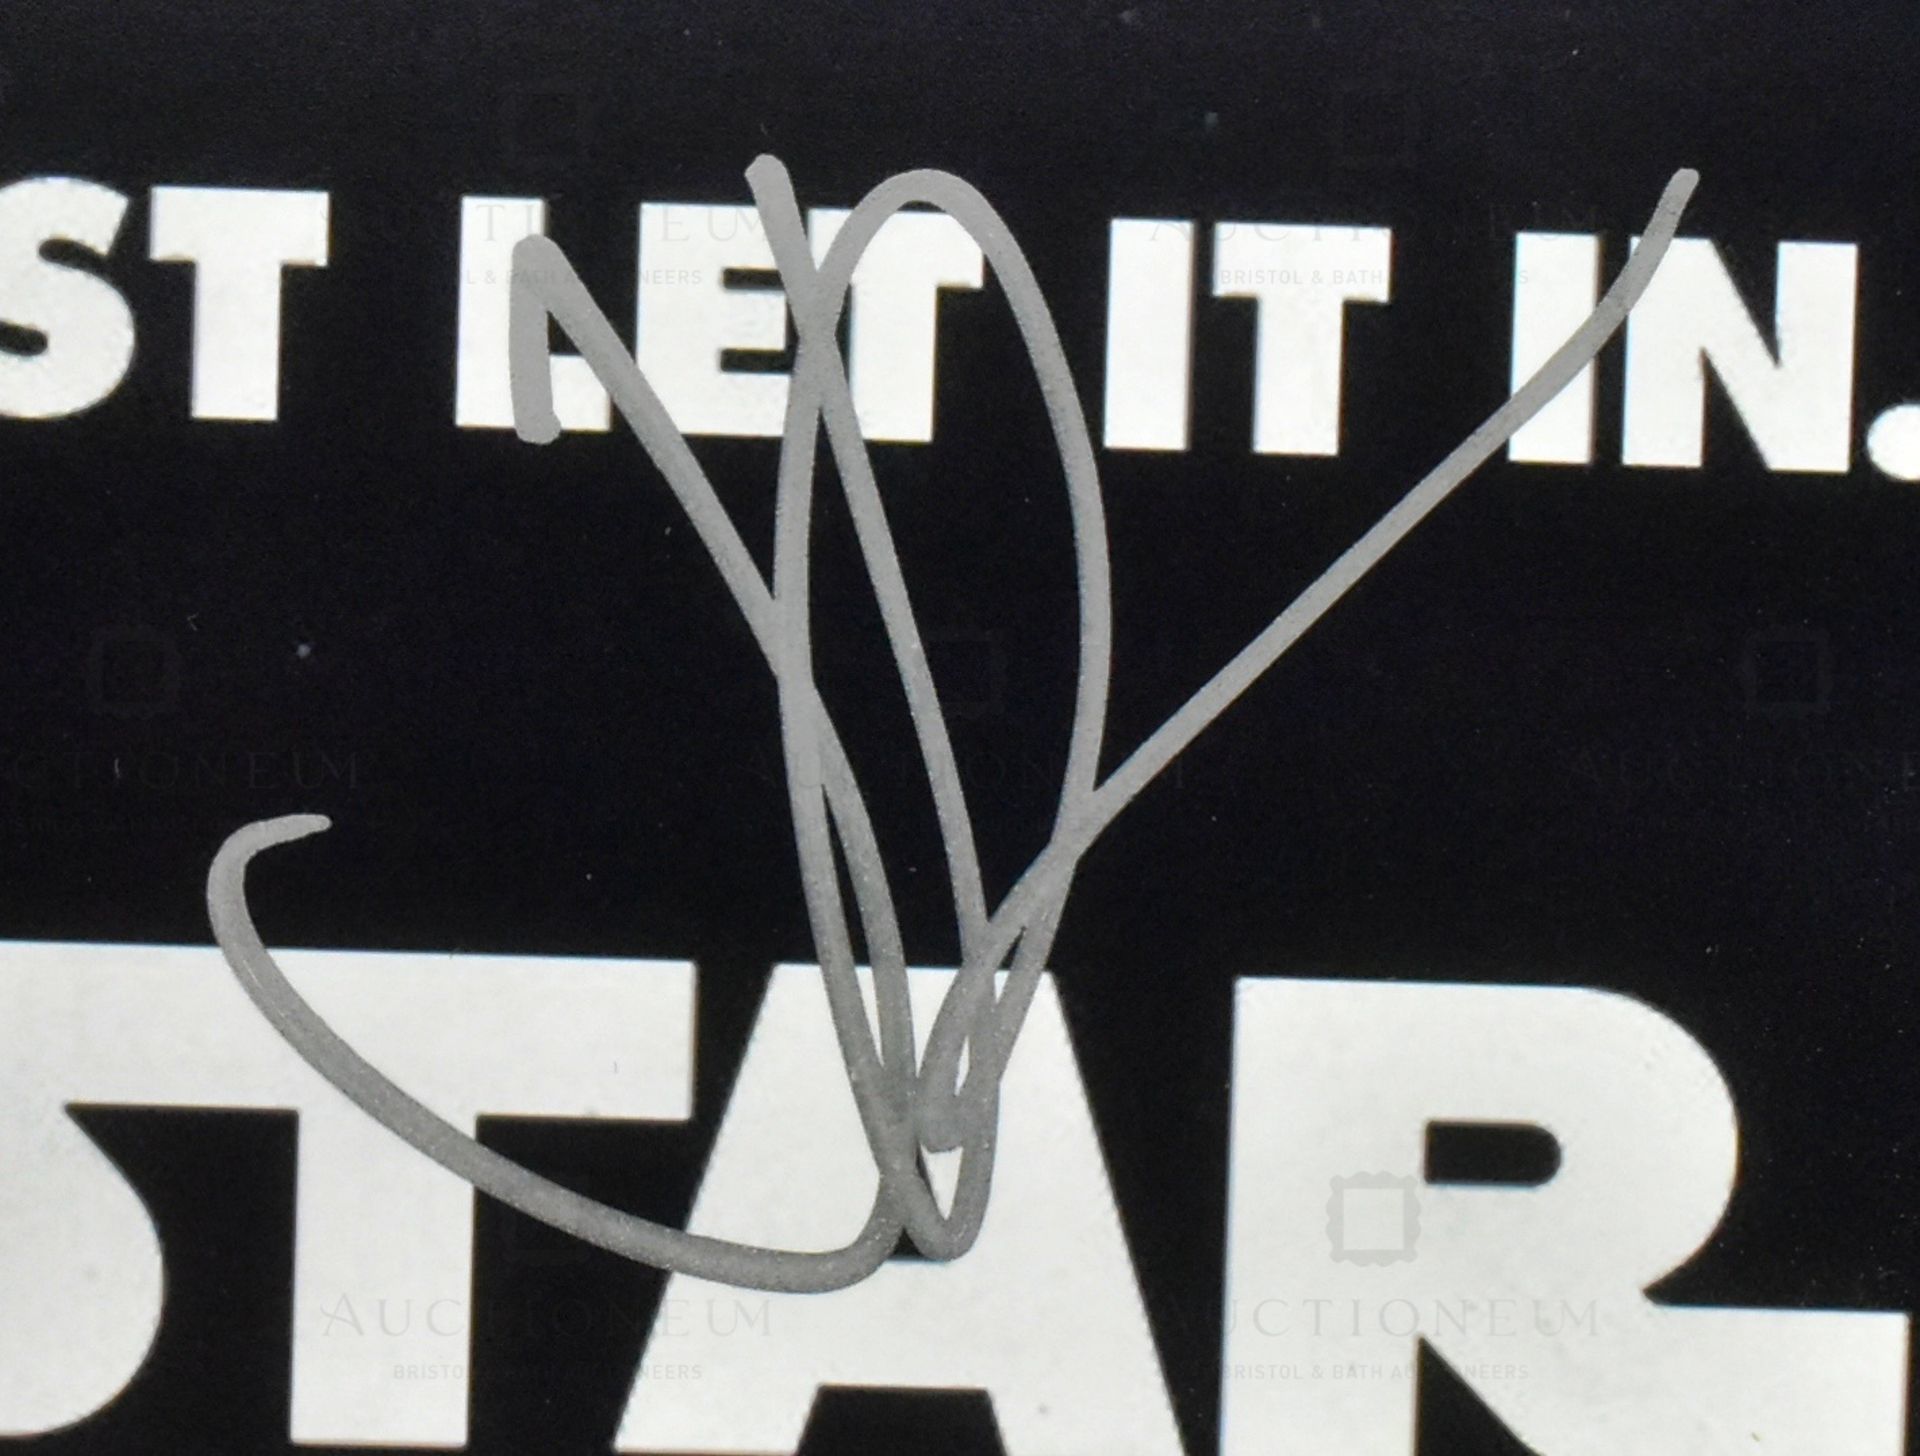 STAR WARS - JJ ABRAMS (DIRECTOR) - AUTOGRAPHED 8X10" PHOTO - BECKETT - Image 2 of 2